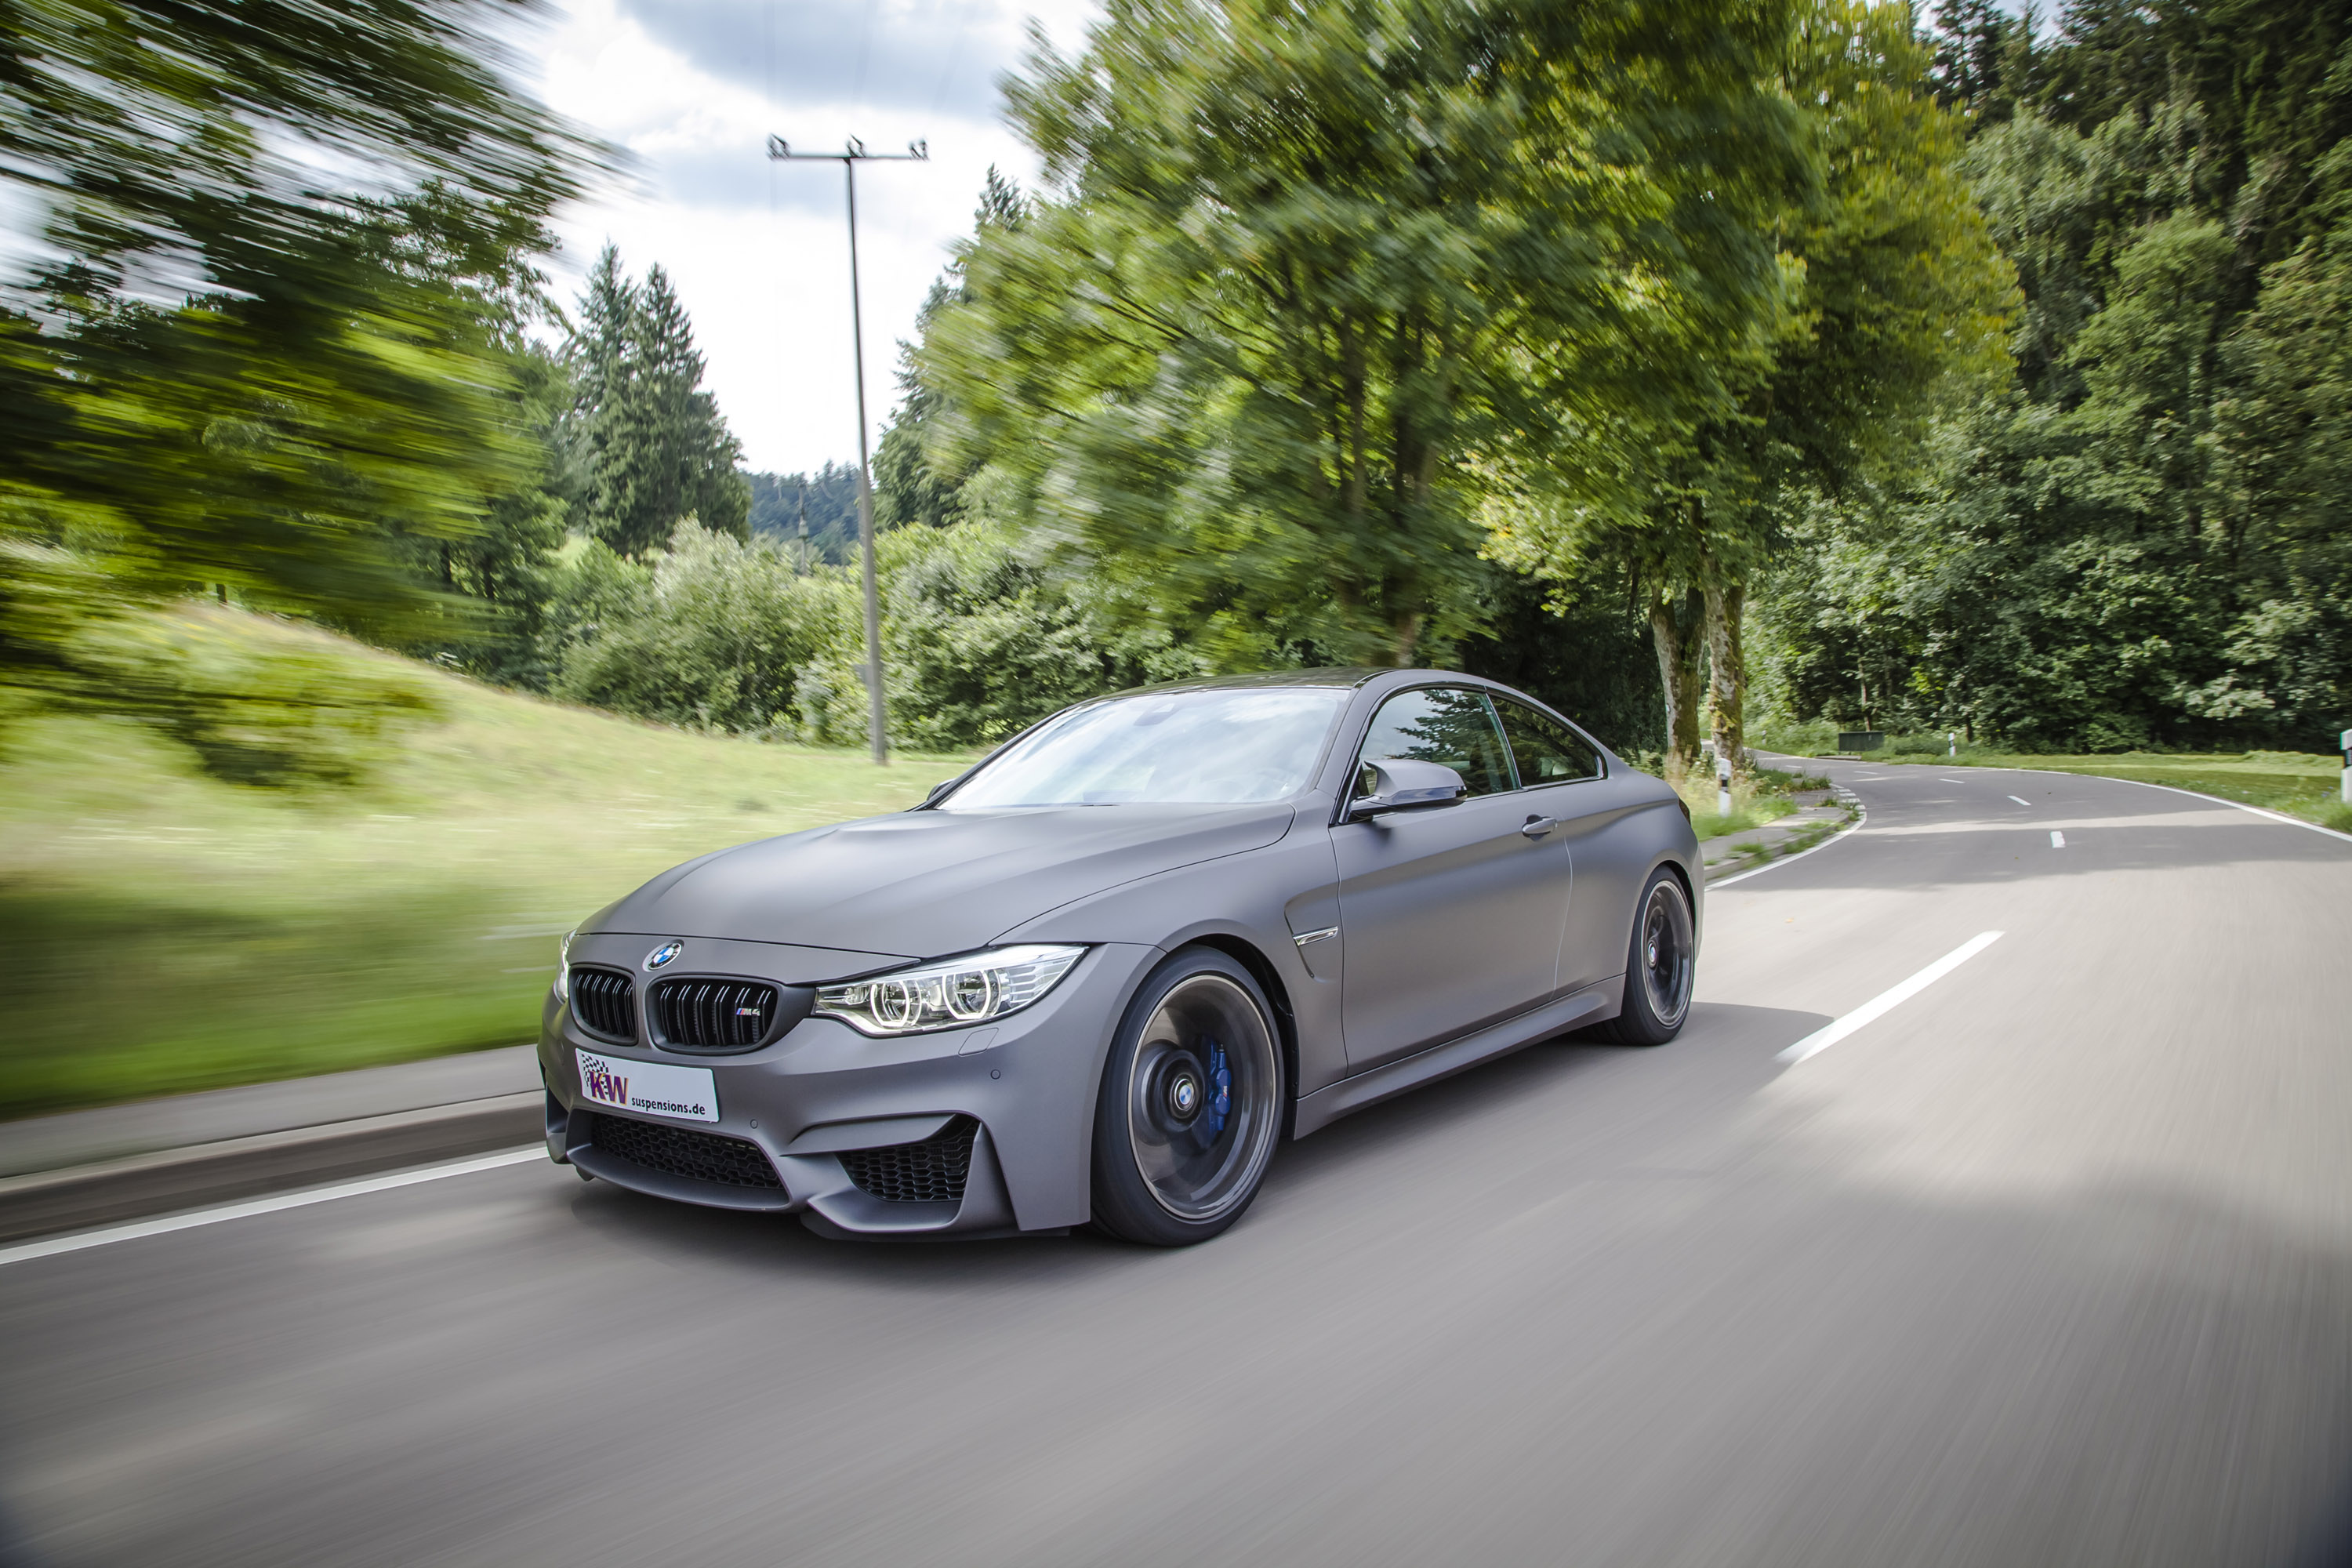 KW Clubsport BMW M4 and M3 Coilover Kits